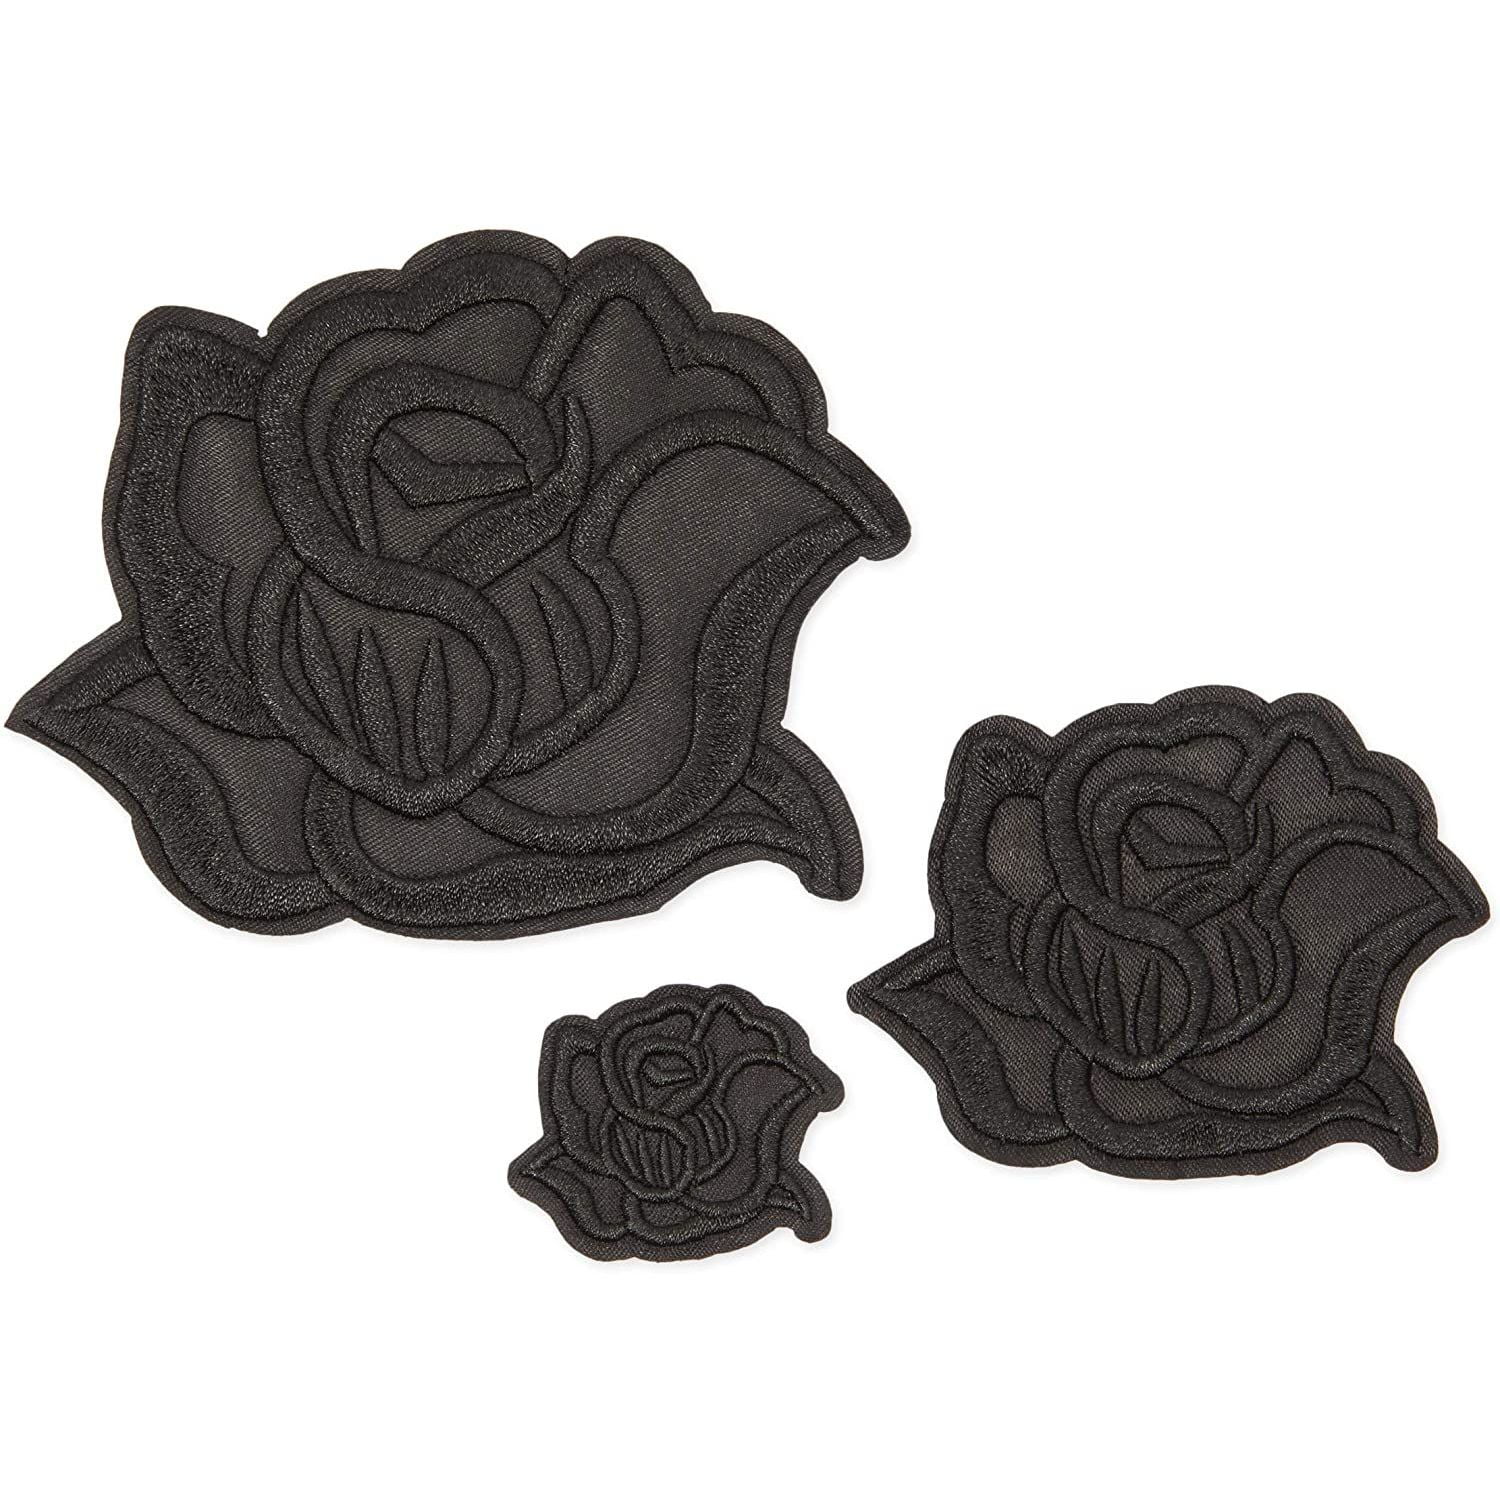 Black roses pair flowers gothic rock & roll appliques iron-on patches S-1035 